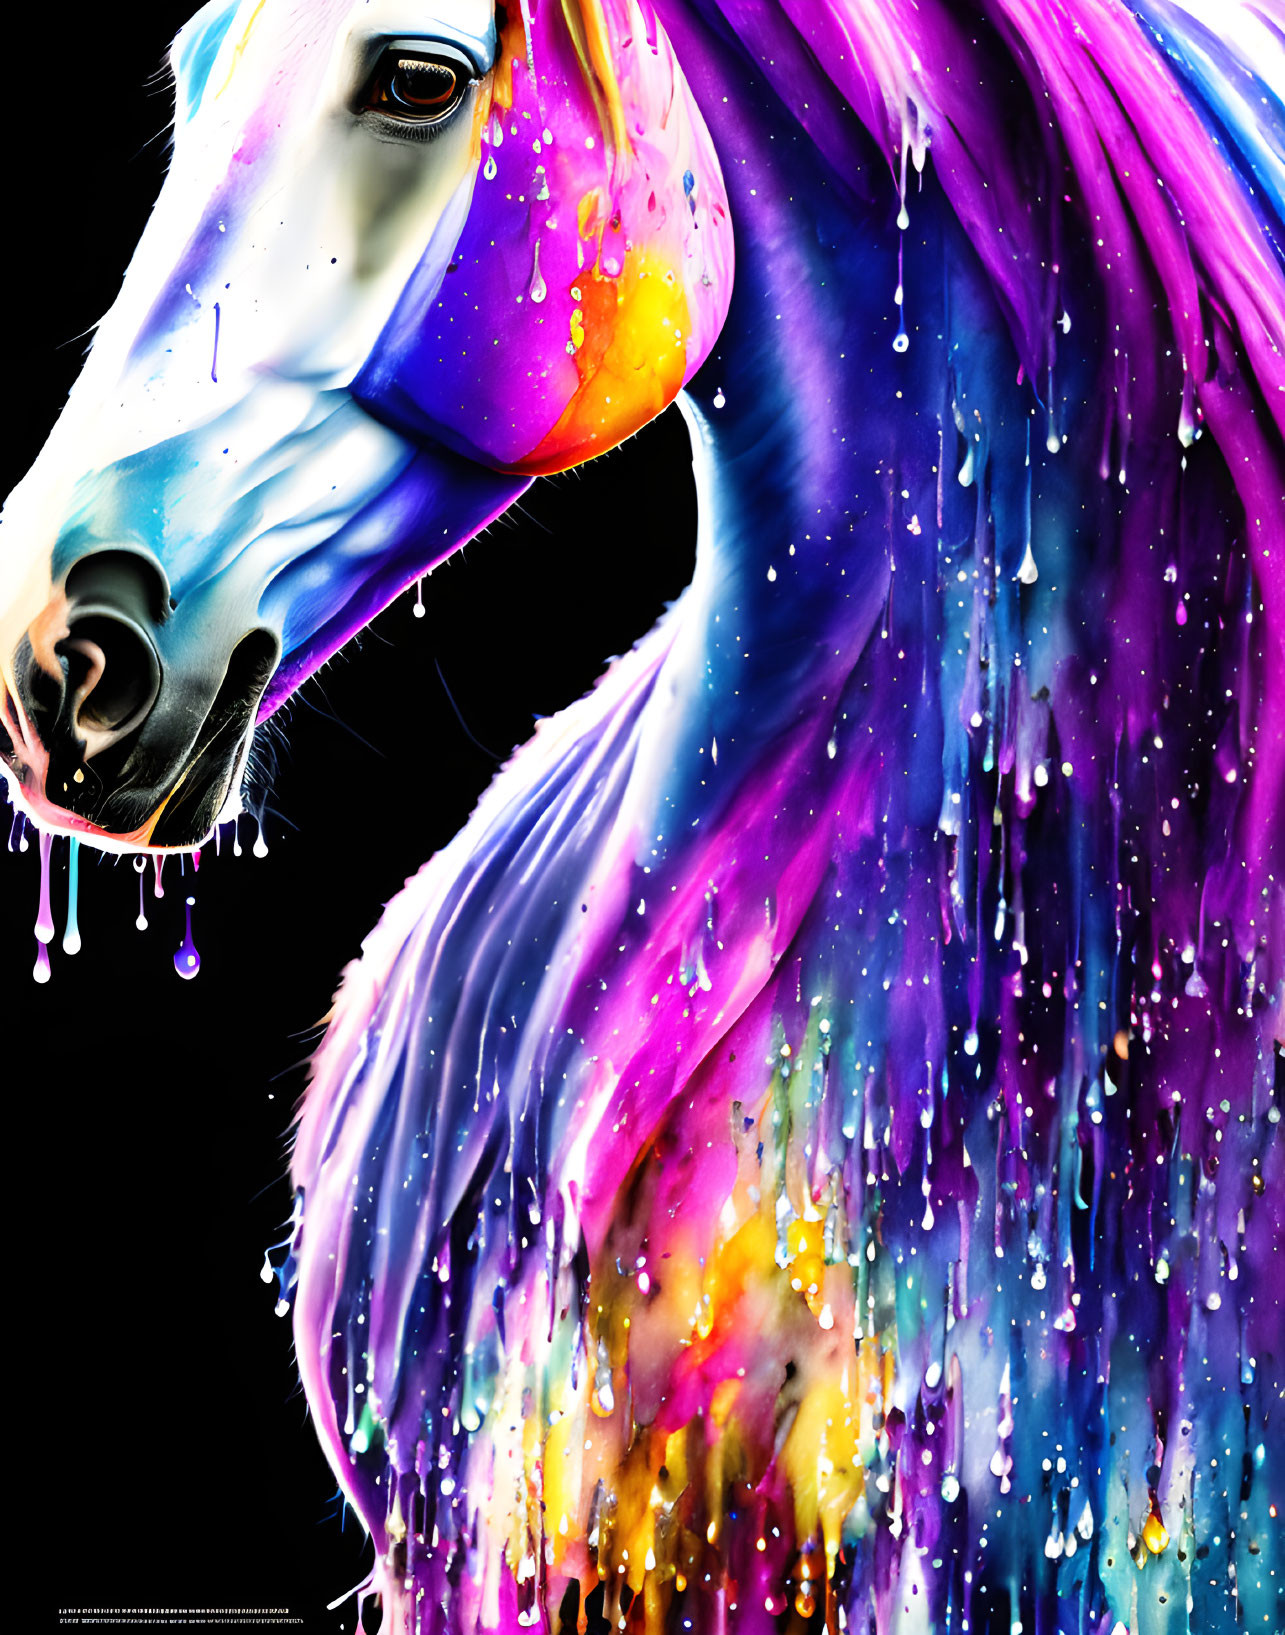 Colorful Horse Artwork with Cosmic Paint Drips on Black Background